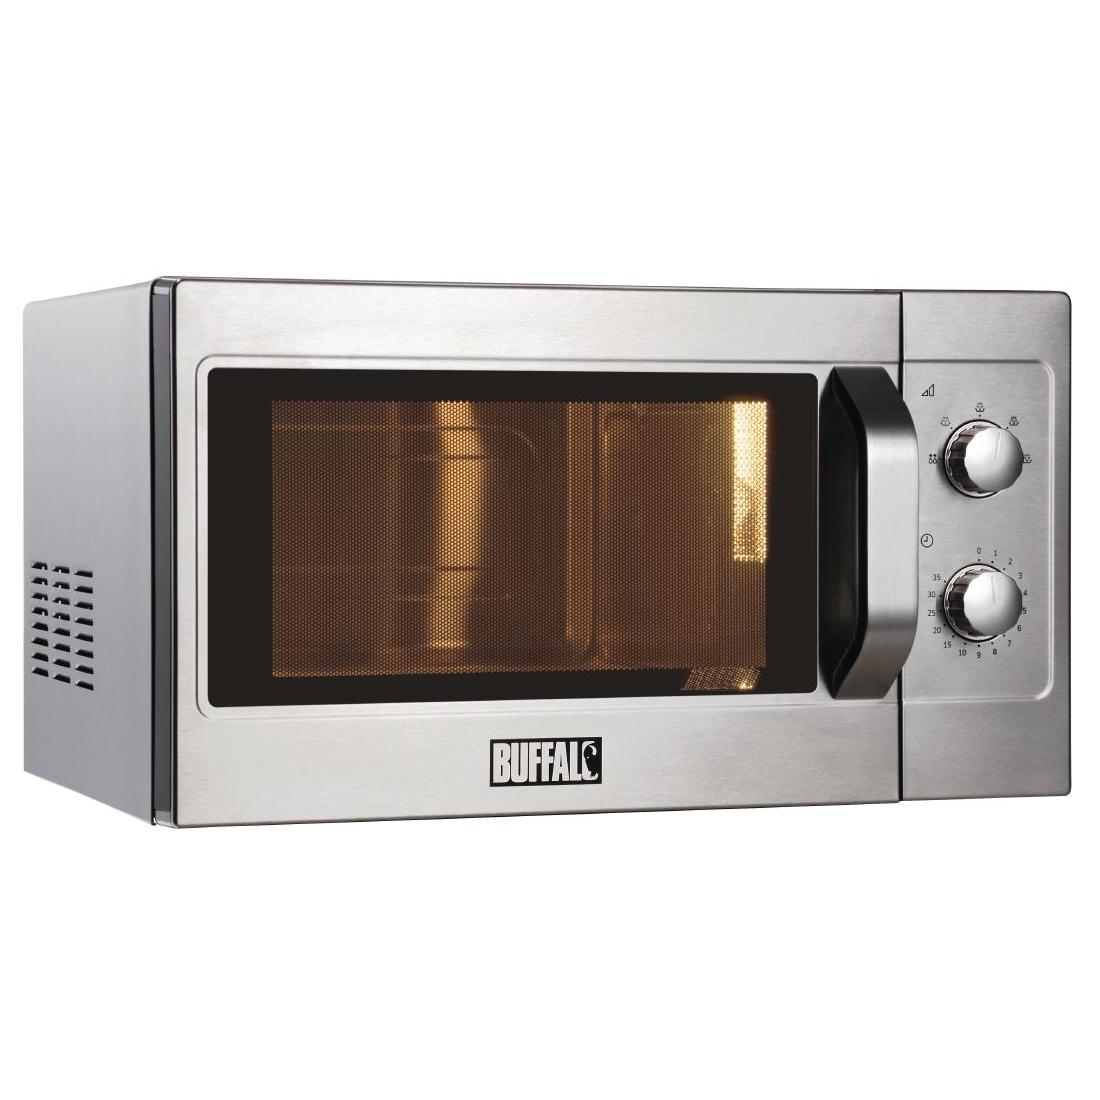 Buffalo Manual Commercial Microwave Oven 1100W - GK643 - 1